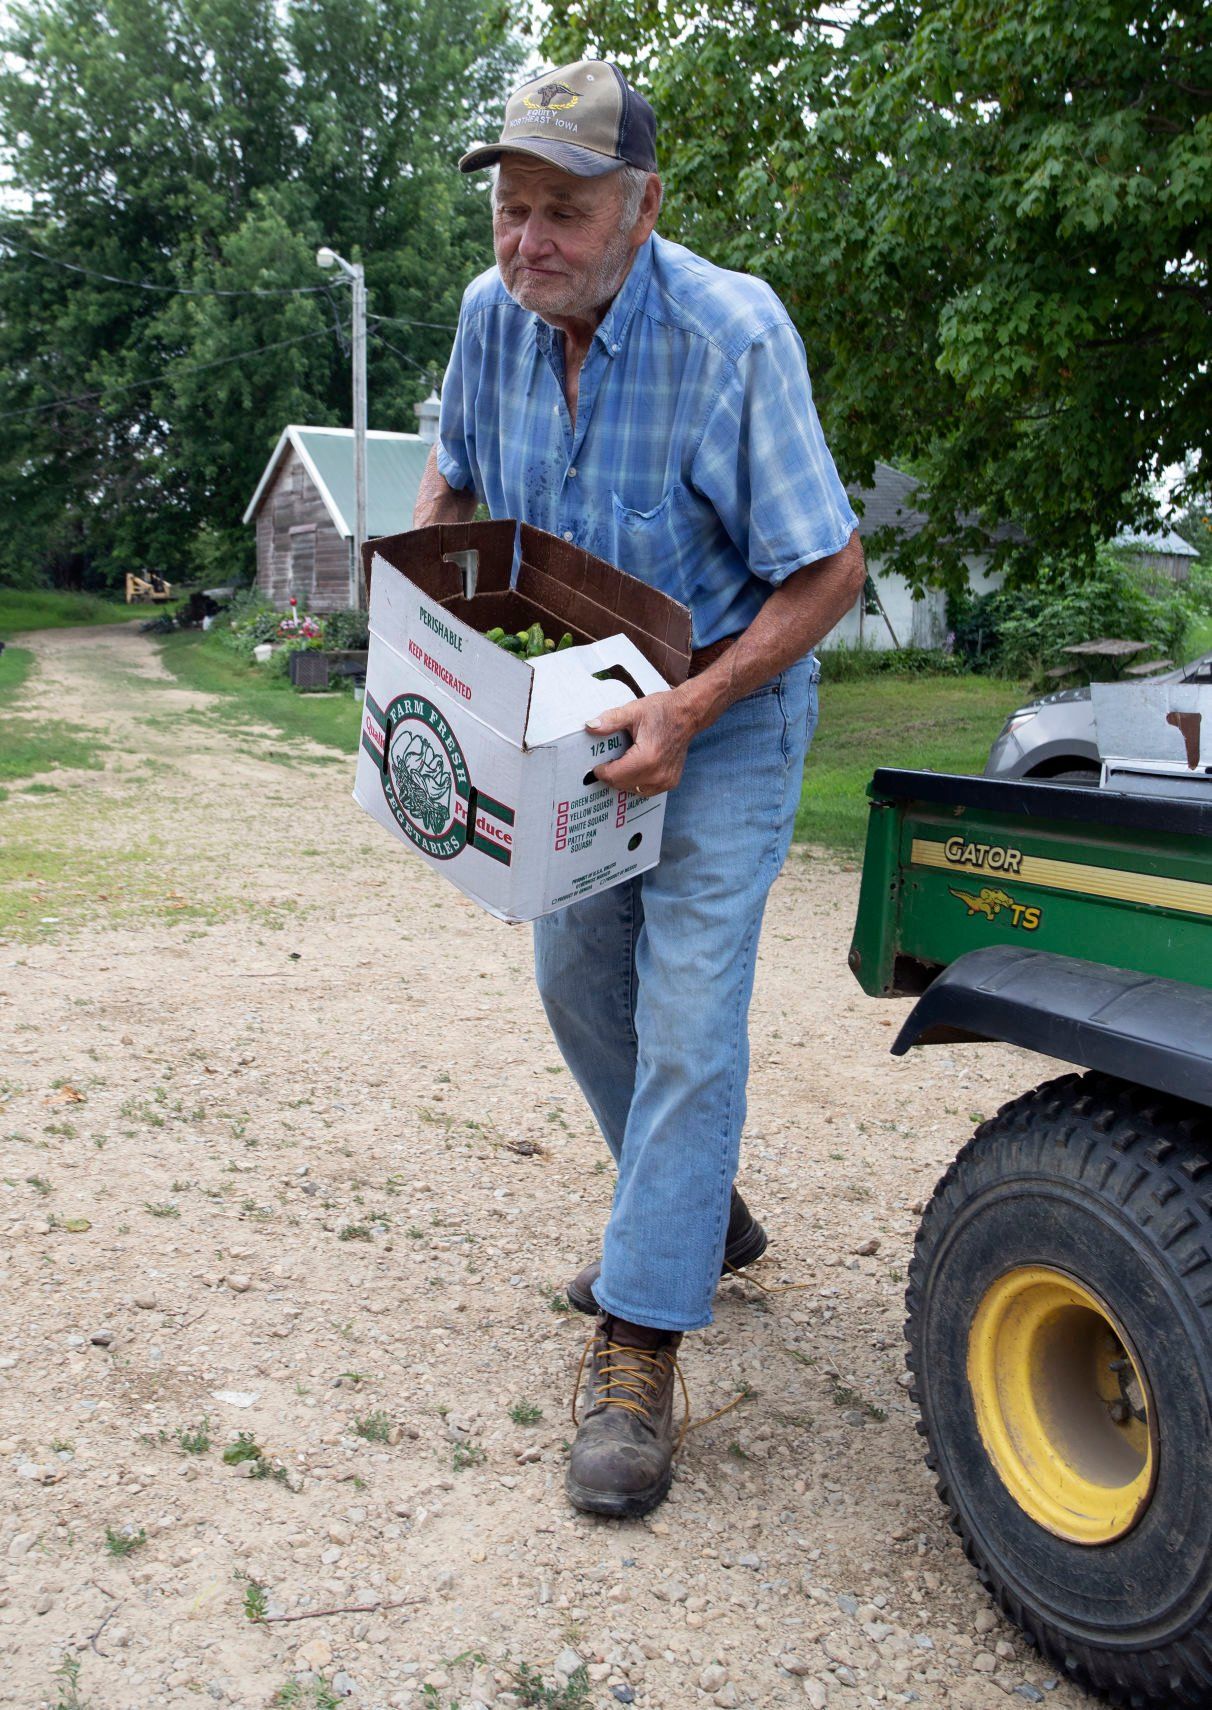 Vernon Kruse unloads a box of pickles on his family’s farm in rural Lancaster.    PHOTO CREDIT: Stephen Gassman